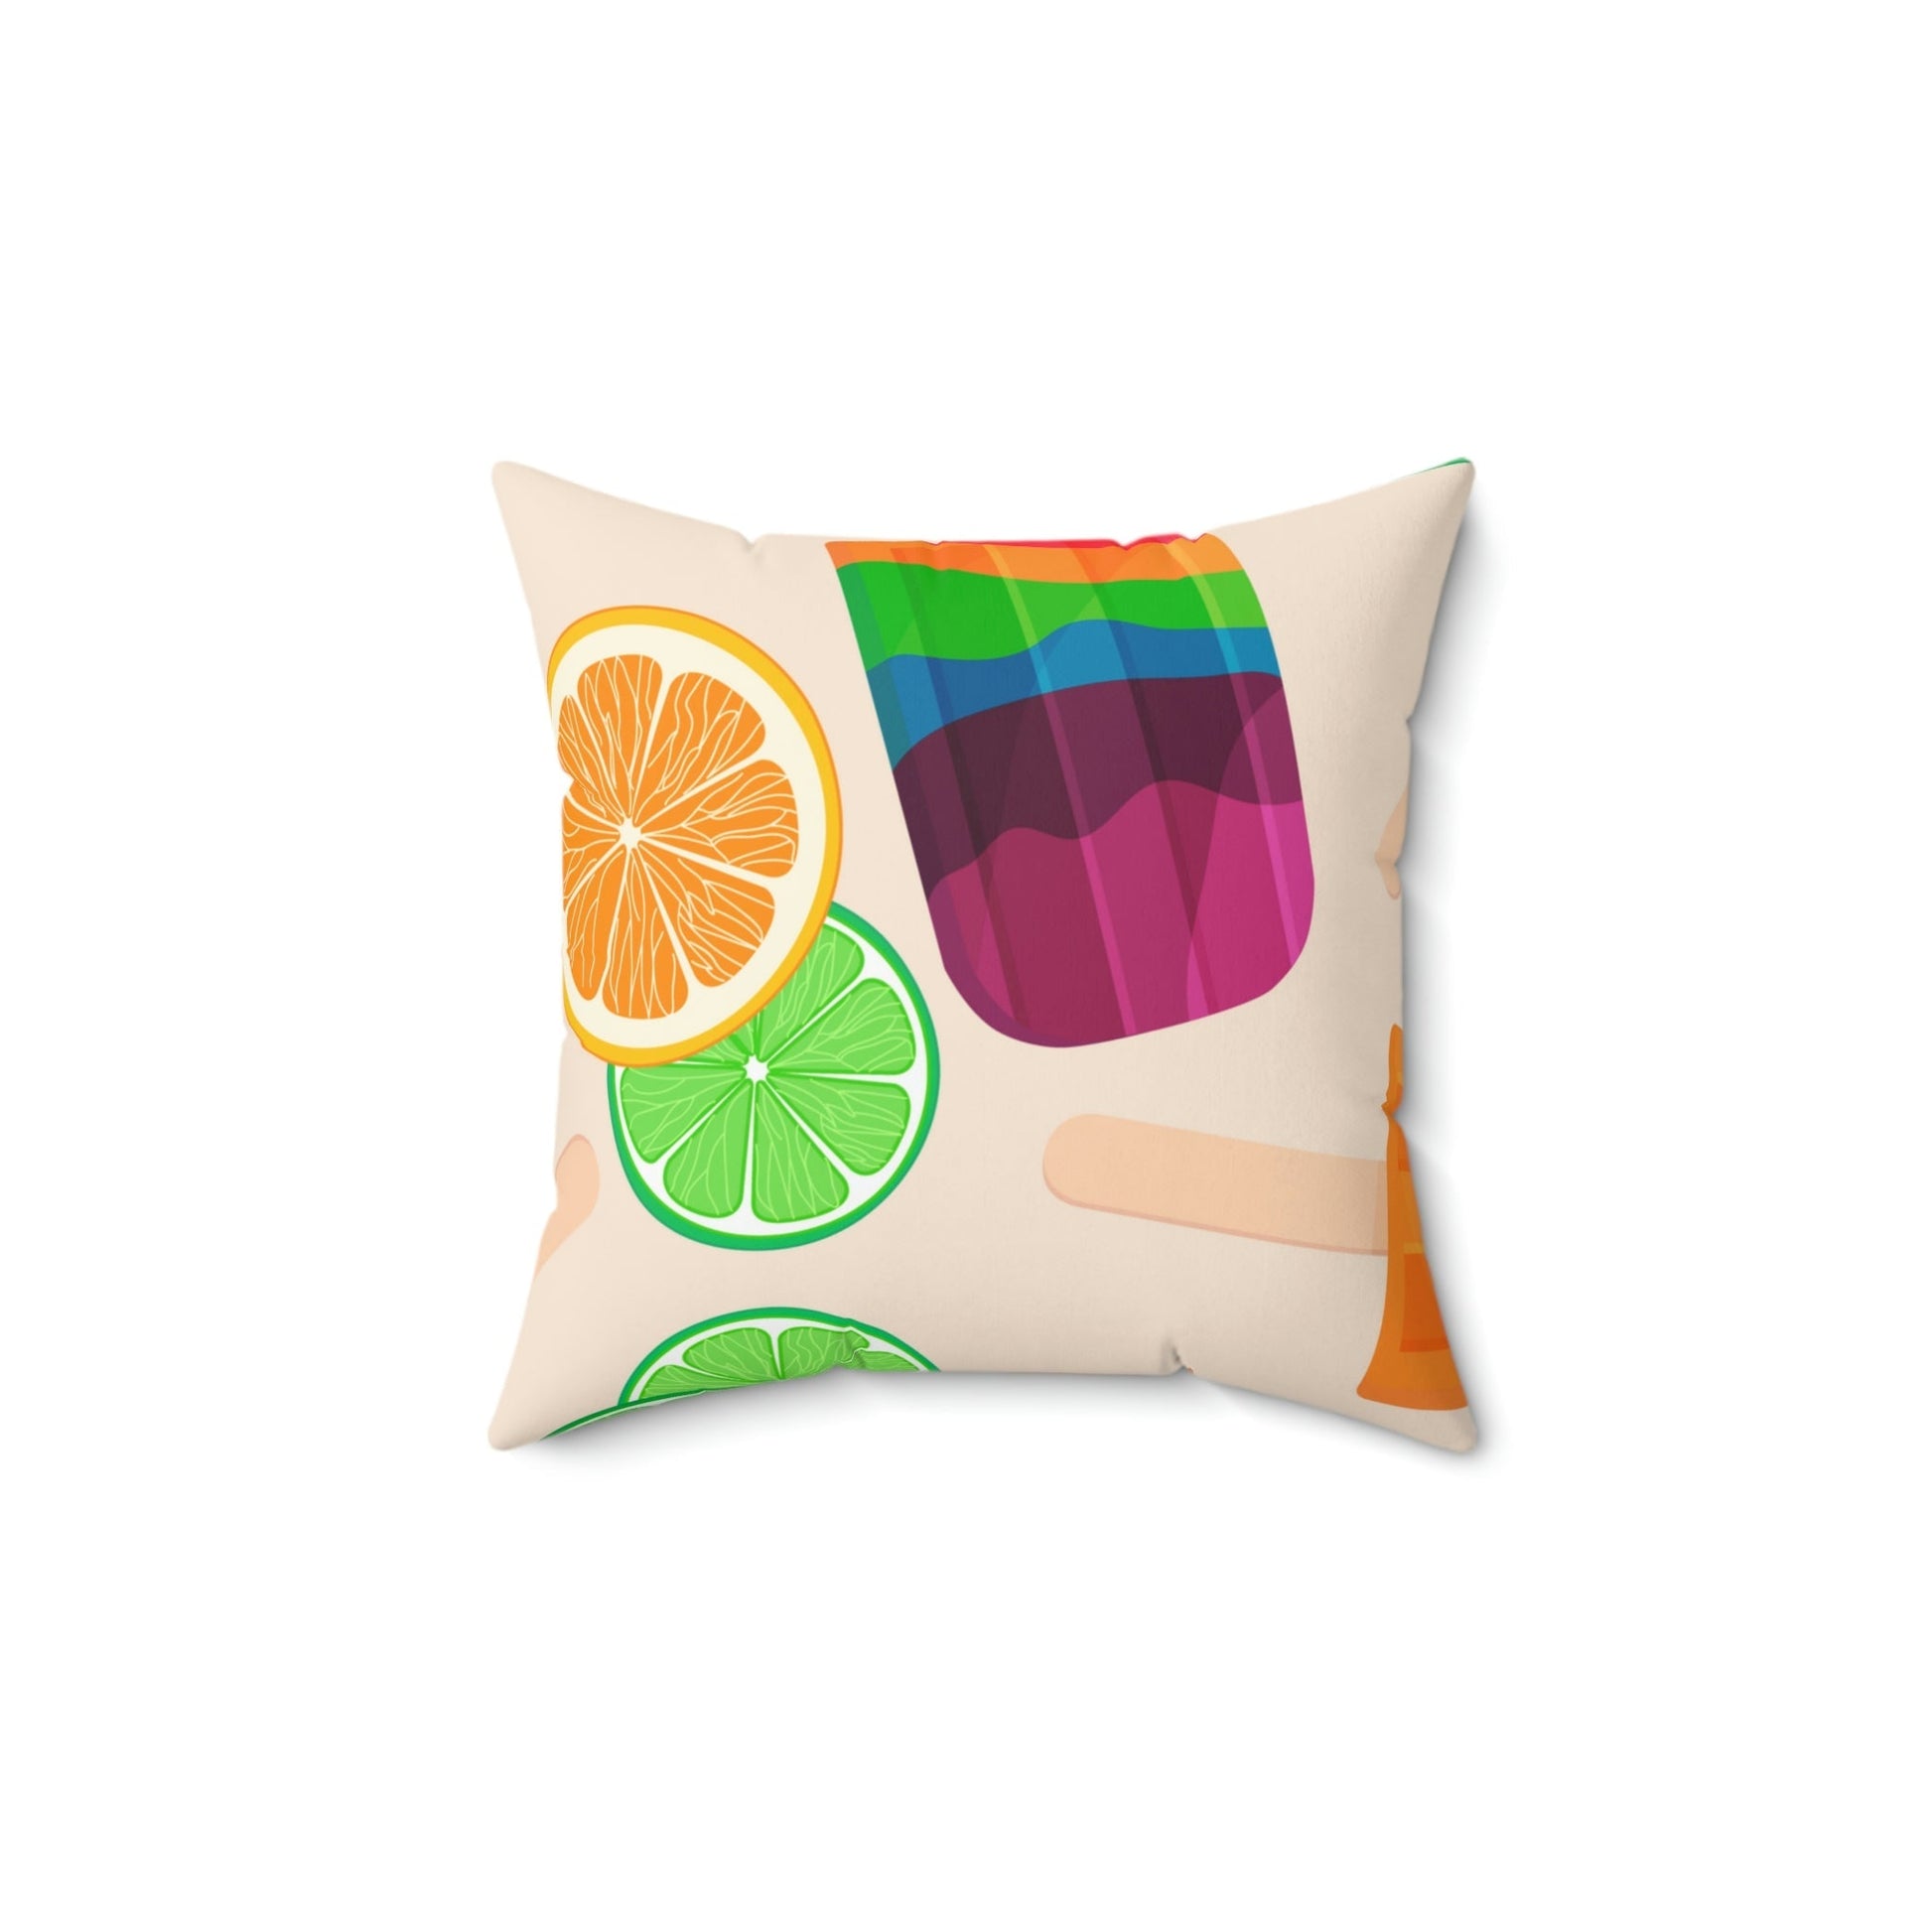 Frozen Rainbow Popsicle Treats Square Pillow Home Decor Pink Sweetheart